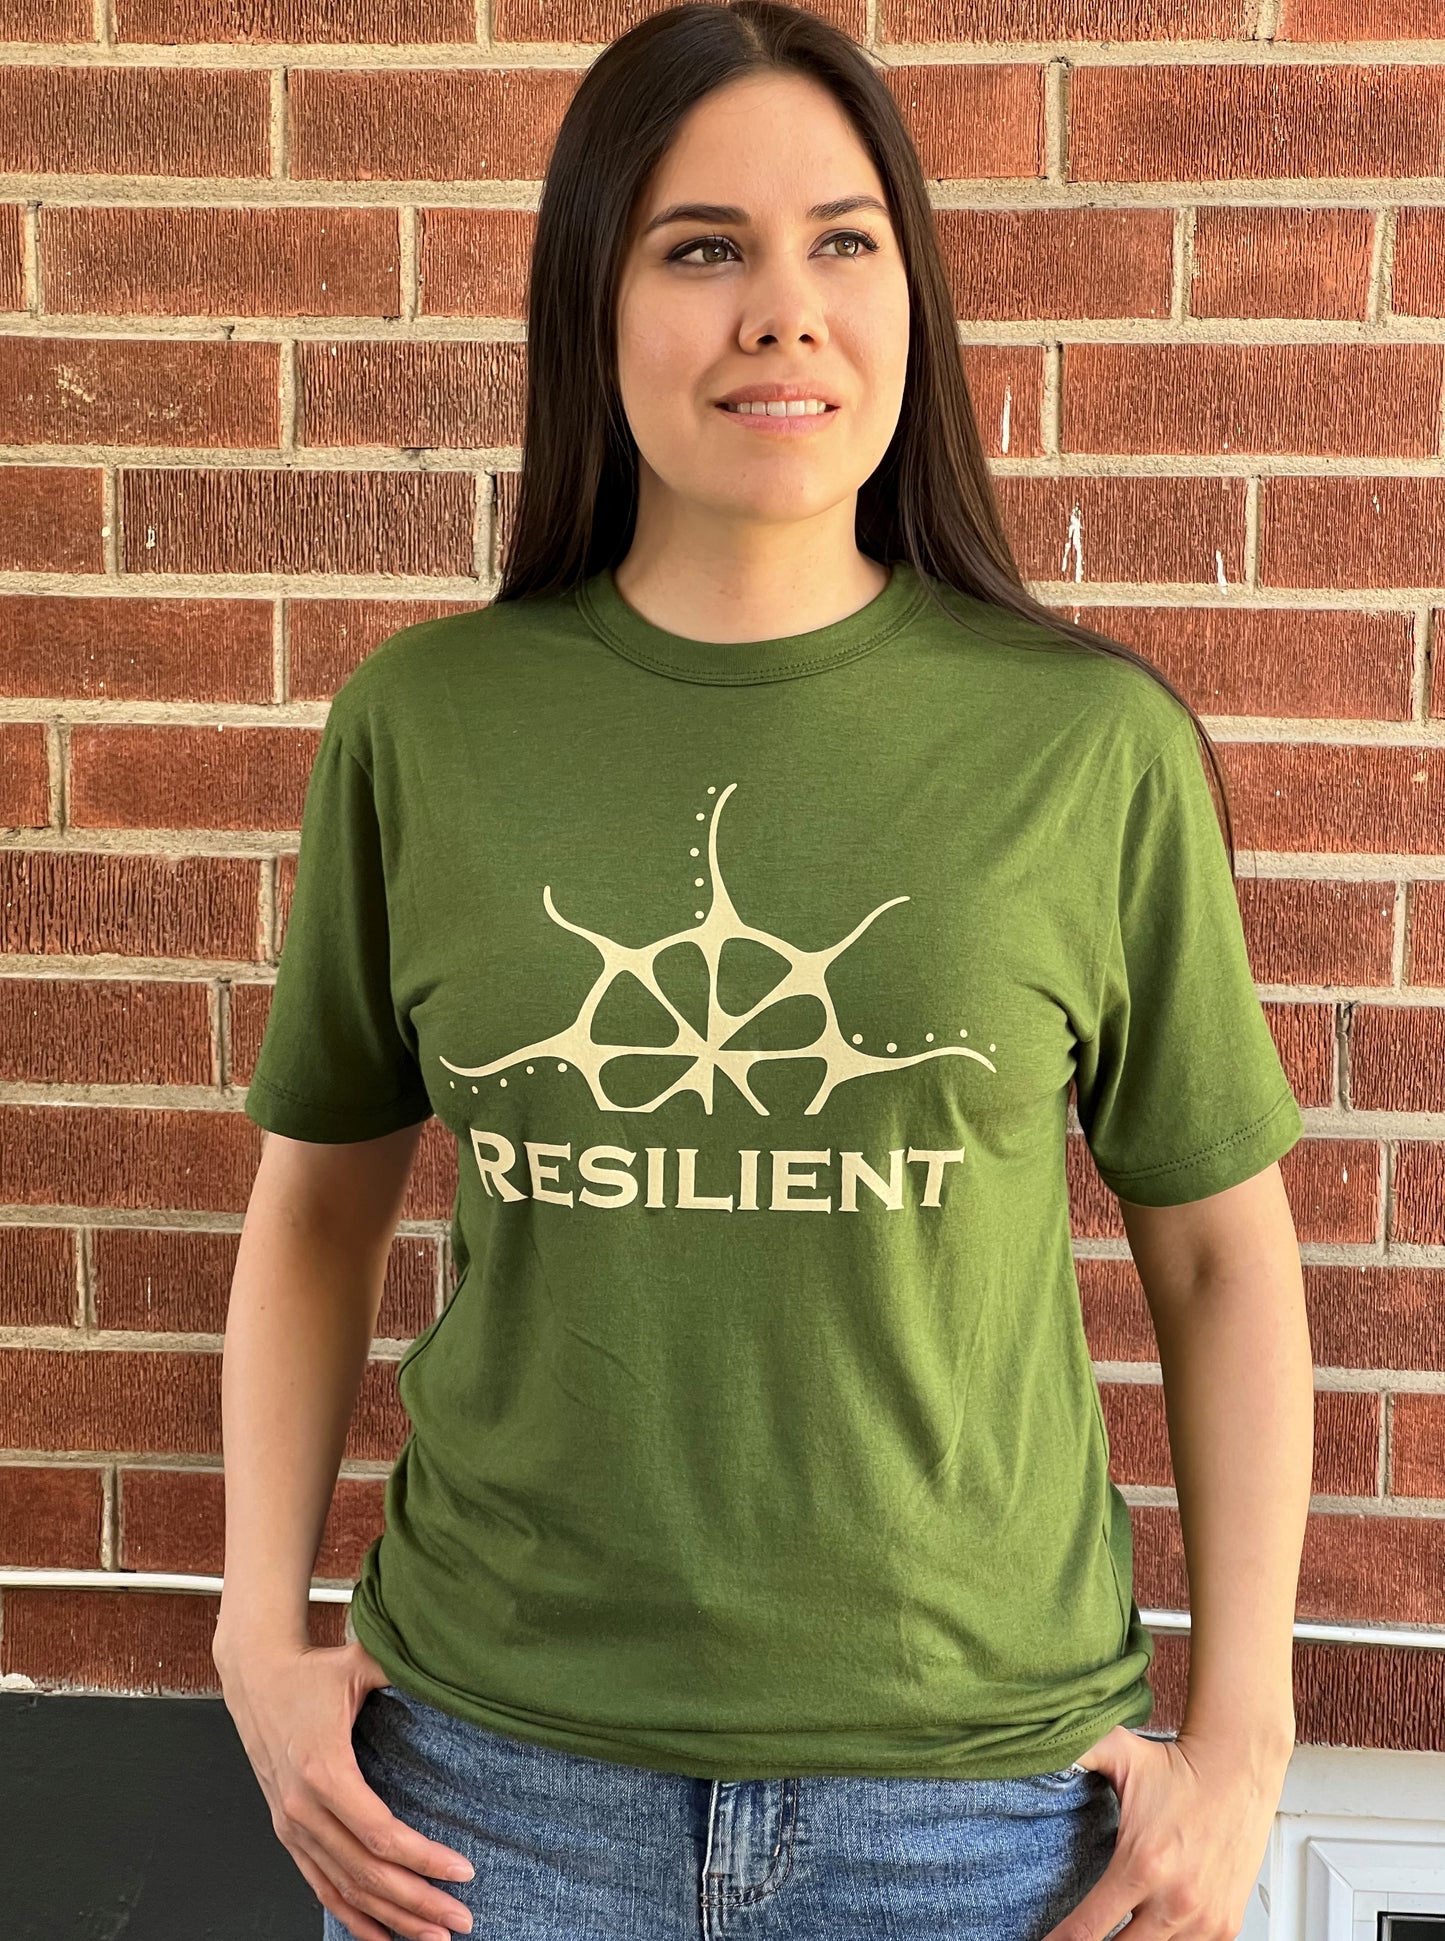 A woman wearing a green t-shirt with a pale yellow print that says "Resilient" under a stylized rising sun.